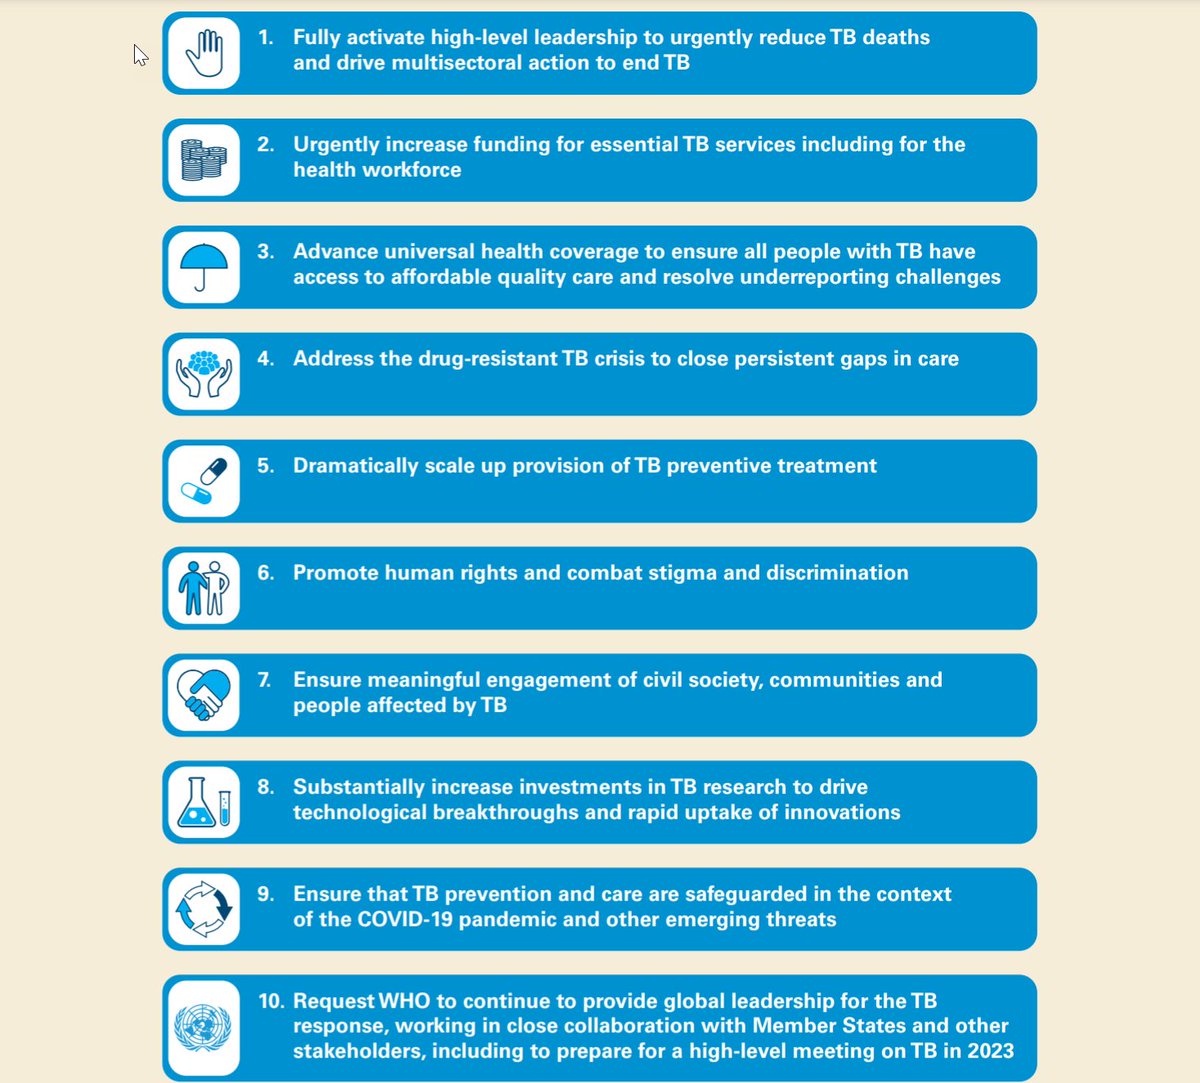 There are the 10 priority recommendations of the UN Secretary-General’s 2020 progress report on TB for actions needed to accelerate progress towards global TB targets